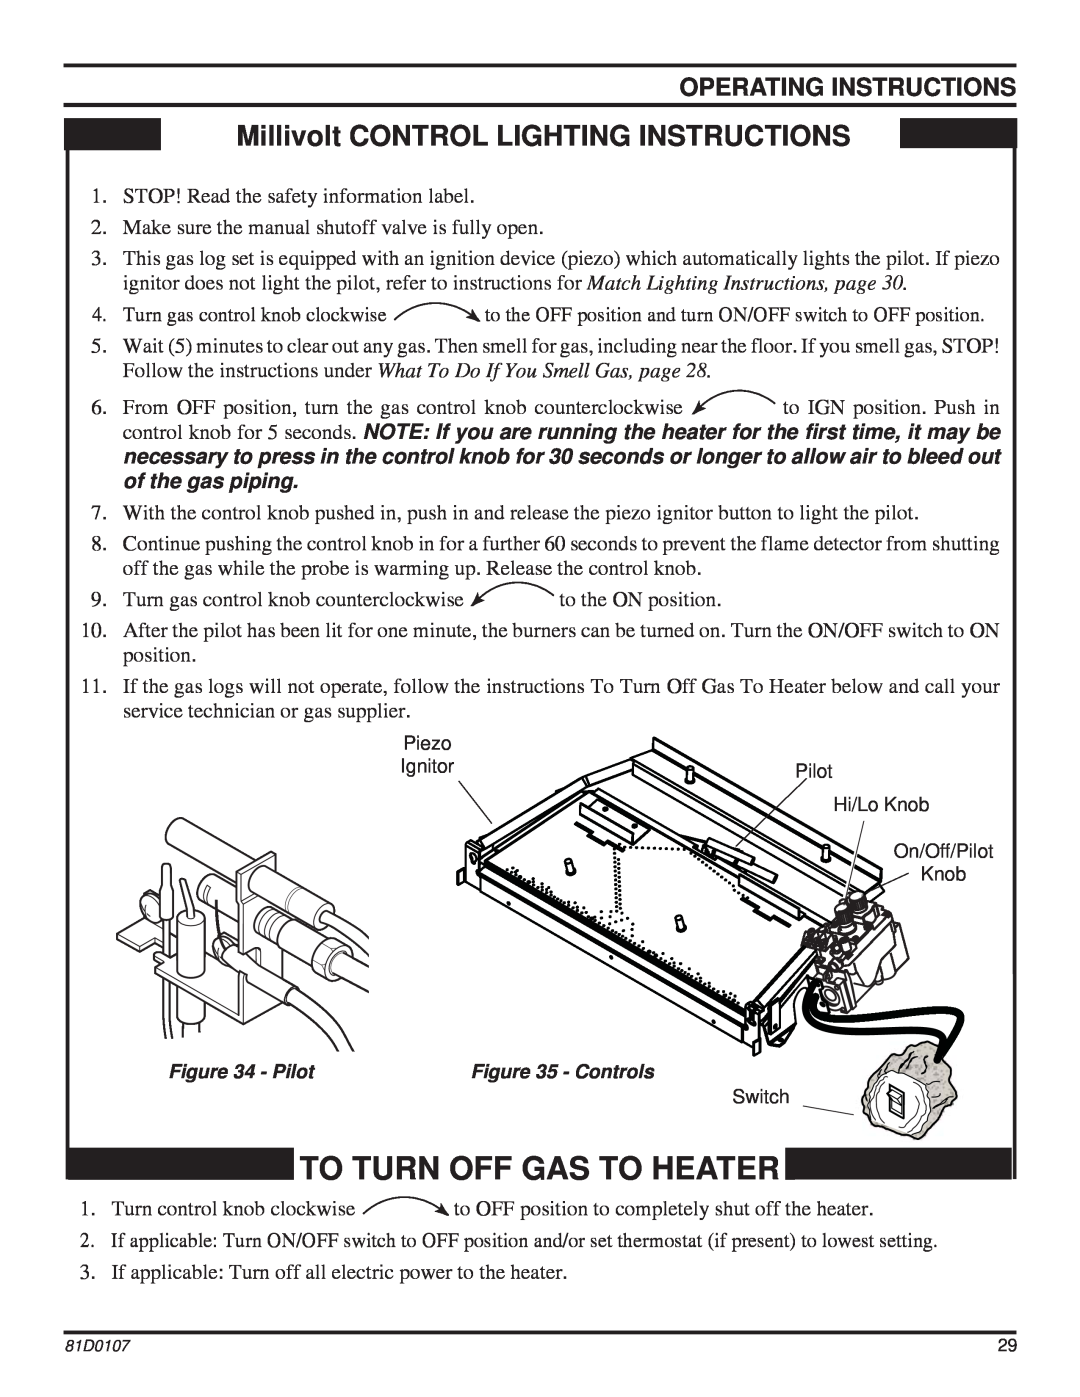 Monessen Hearth NB18, NB24 To Turn Off Gas To Heater, Millivolt CONTROL LIGHTING INSTRUCTIONS, Operating Instructions 